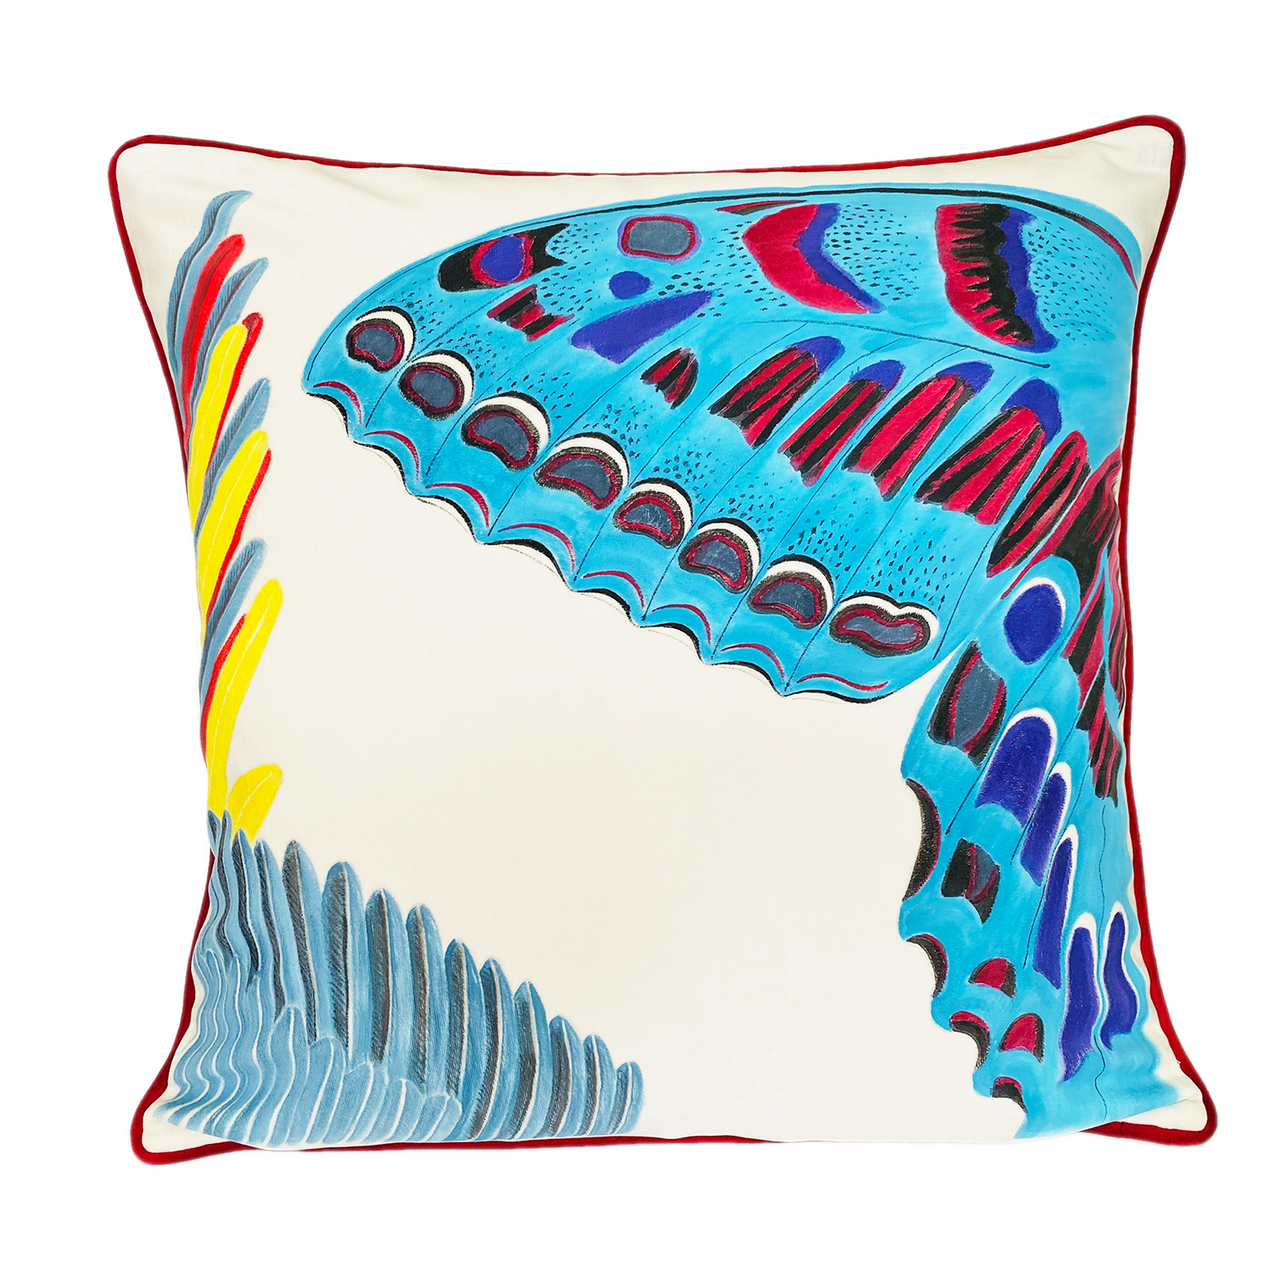 https://cdn11.bigcommerce.com/s-4lp3aqlzu7/images/stencil/1280x1280/products/151/626/Butterfly_painting_pillow__78887.1590991845.png?c=1